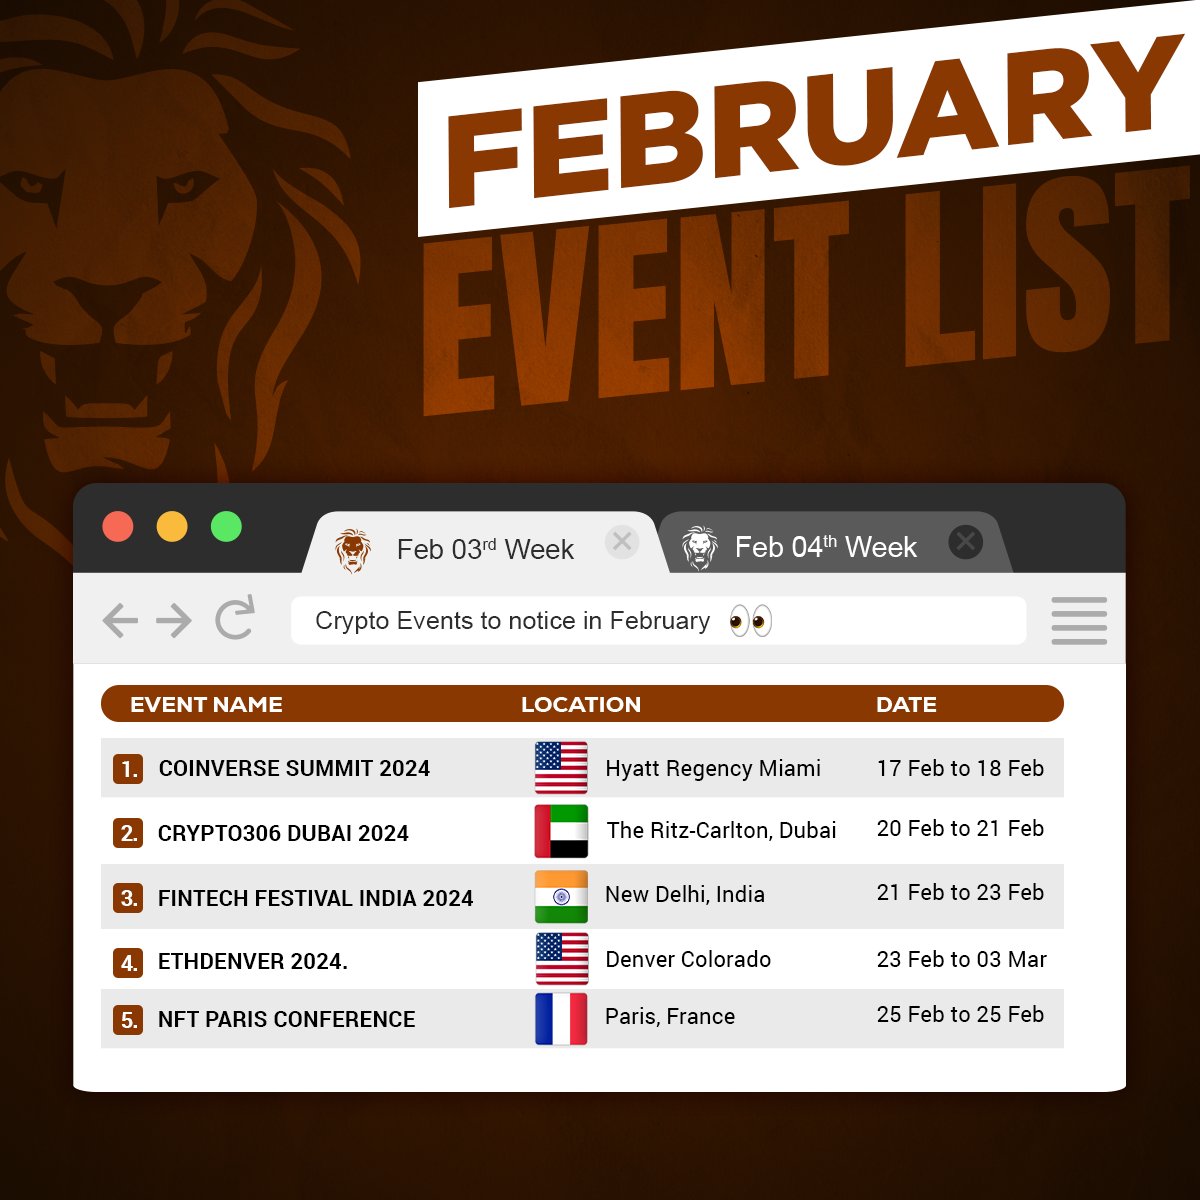 🔥#CryptoEvents To Notice In February 🔥

1 #COINVERSESUMMIT 2024
2 #CRYPTO306DUBAI 2024
3 #FINTECH FESTIVAL INDIA 2024
4 #ETHDENVER2024
5 #NFTPARISCONFERENCE

📅Read More Events: coingabbar.com/en/coin-events…

#Event #CryptoEvent #CoinGabbar #conference2024 #blockchainsummit